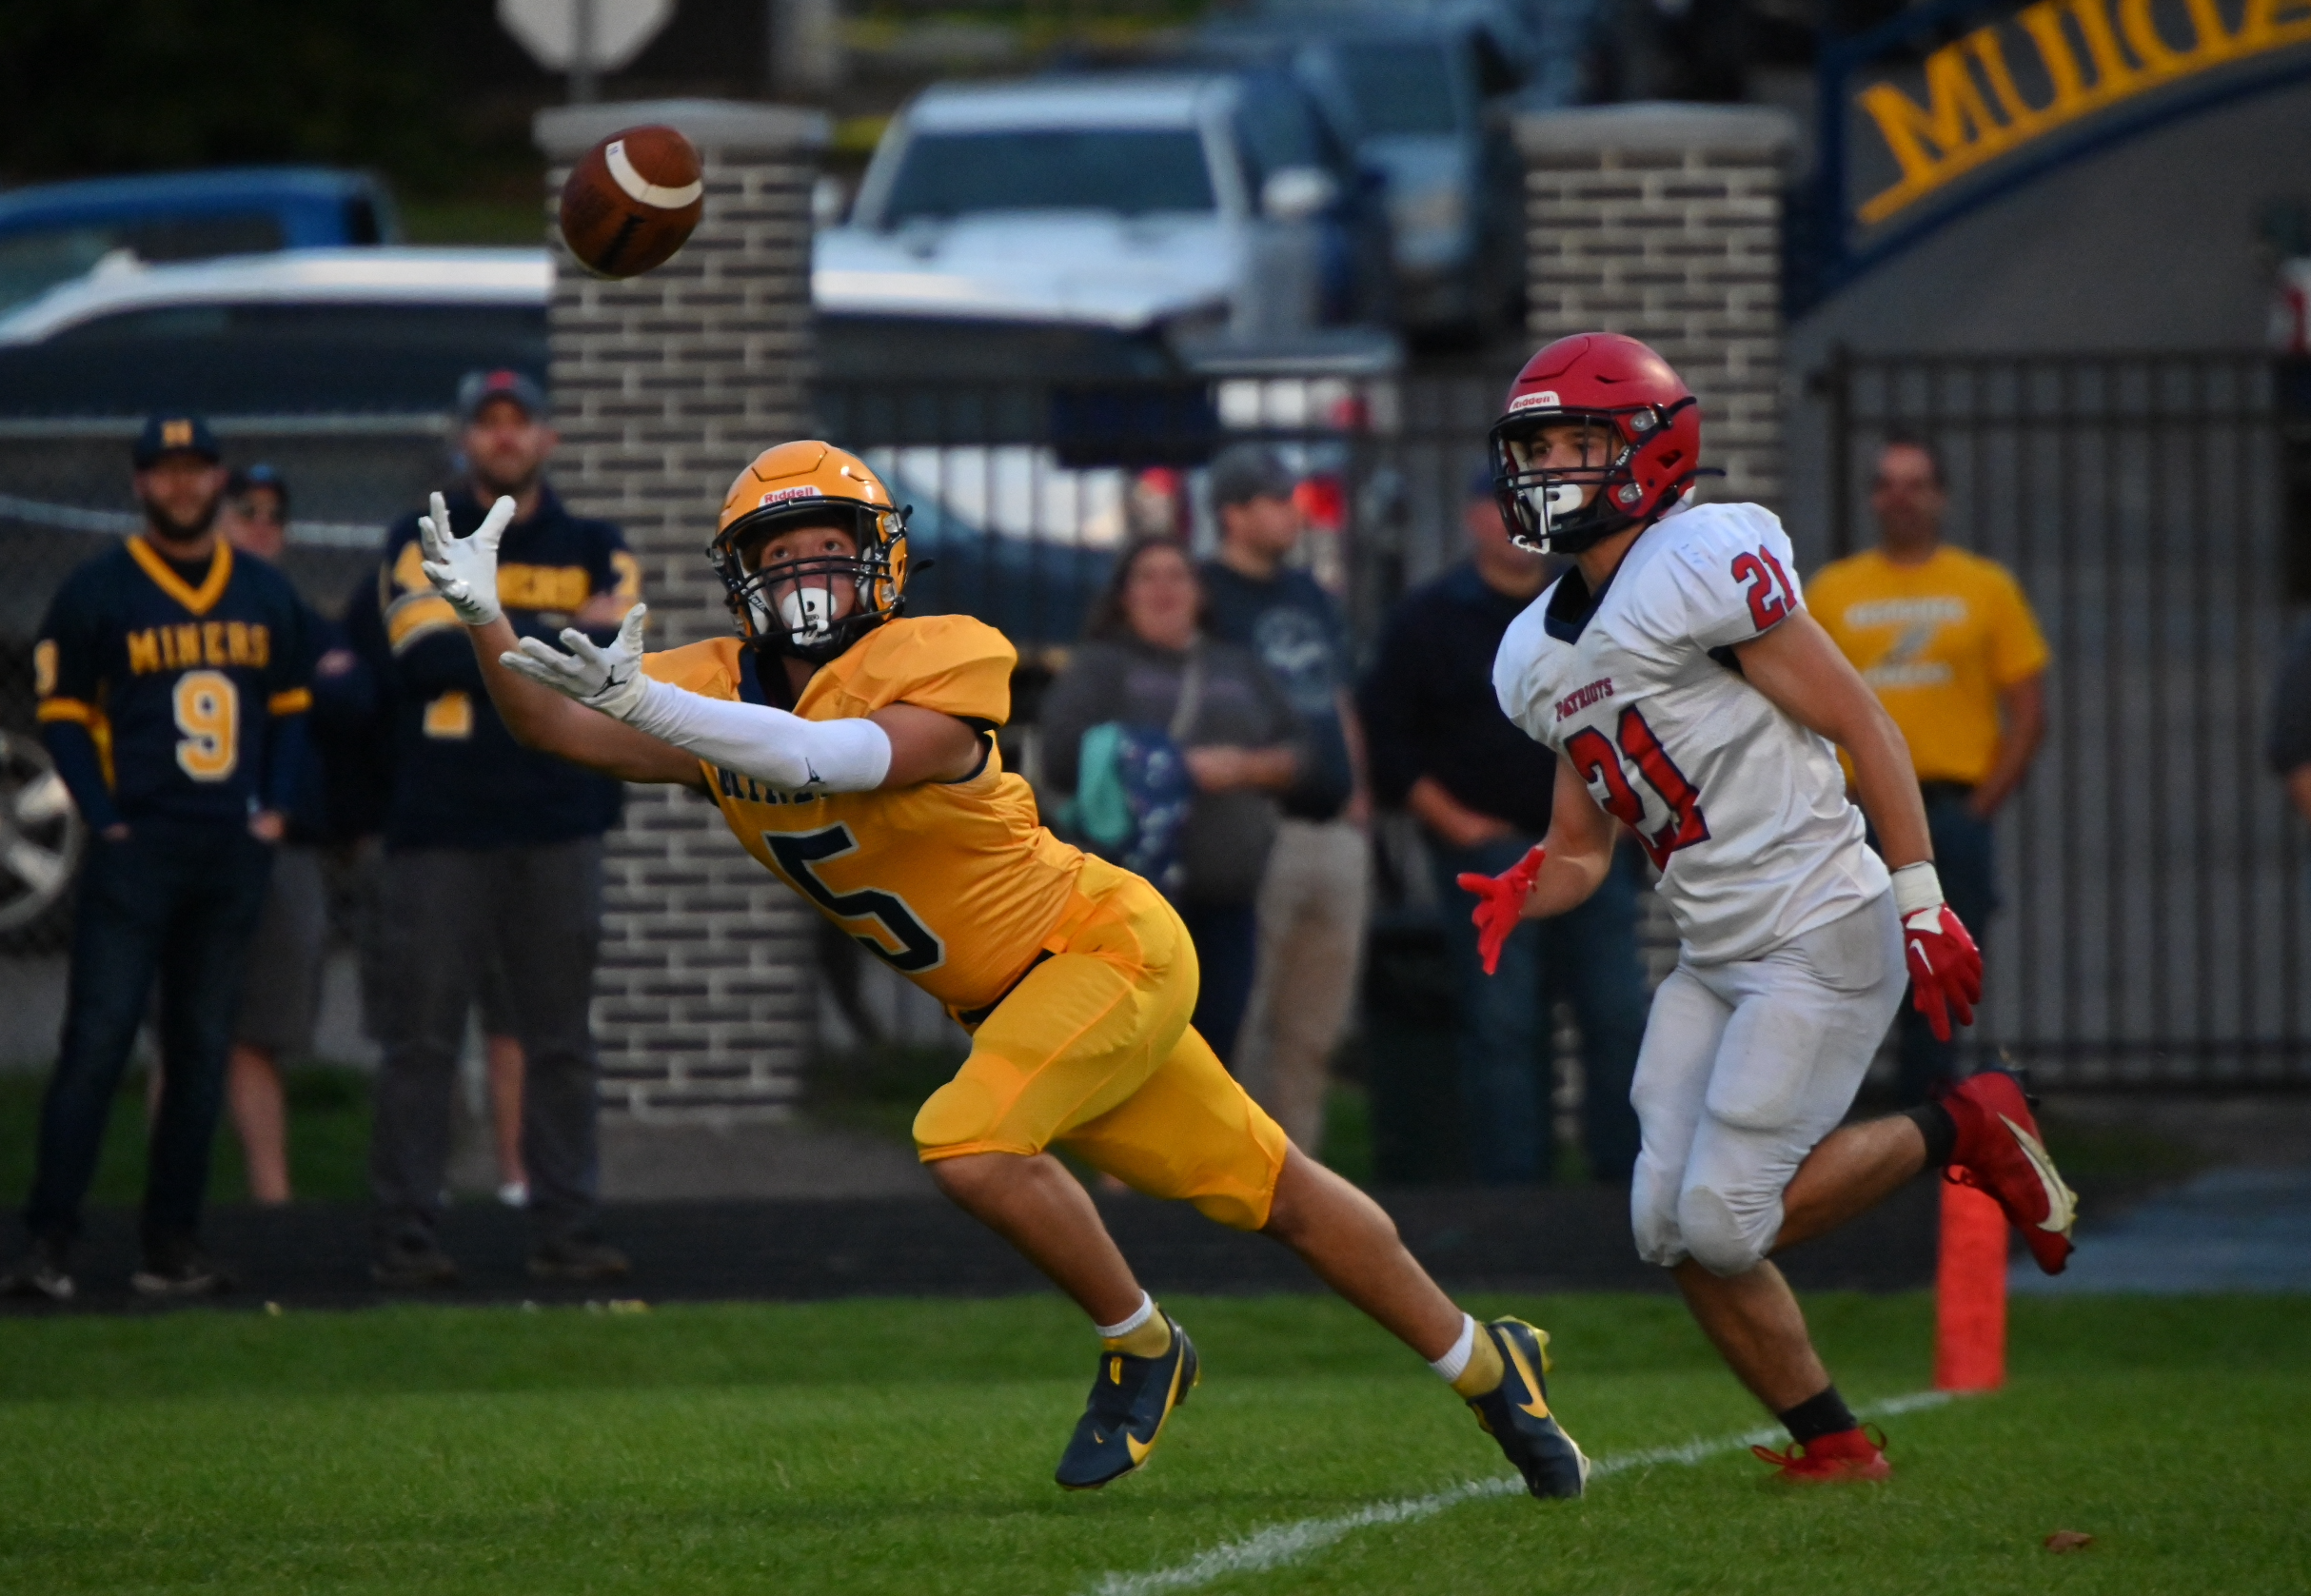 Negaunee's Ian Engstrom (5) tries to catch a pass just a little bit out of his reach.